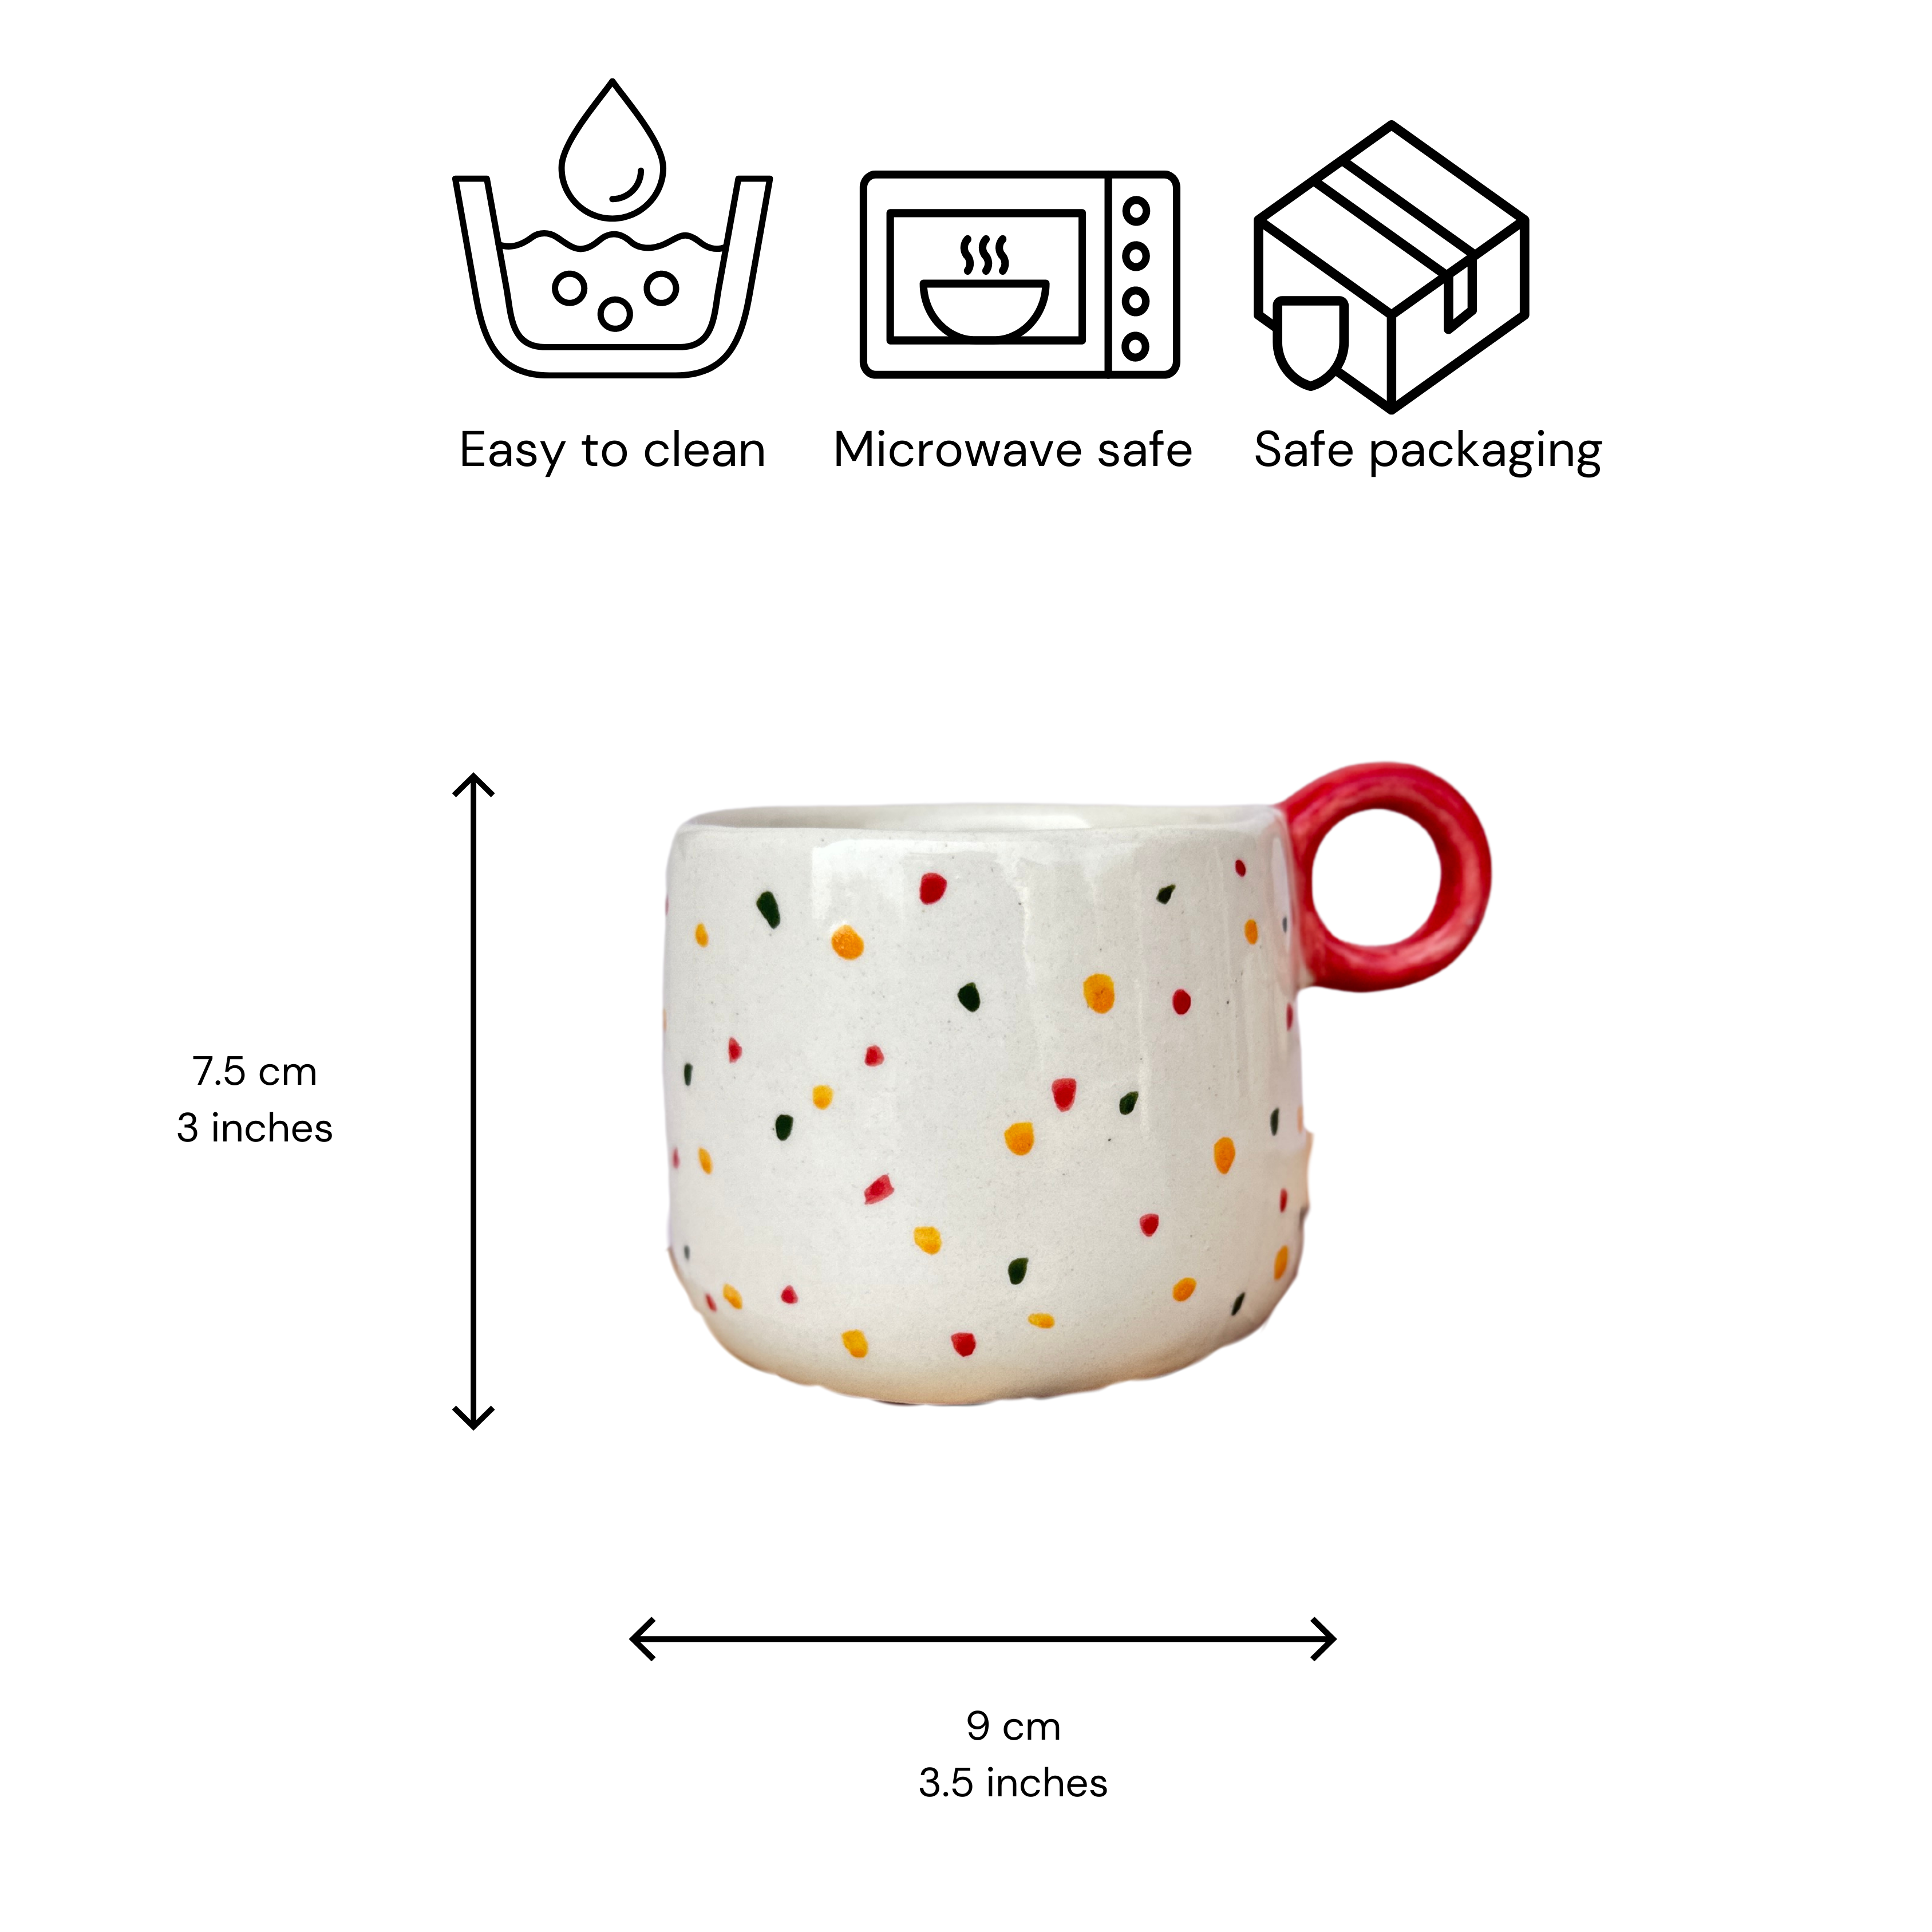 Colourful Dots Ceramic Coffee Cup - 300ml